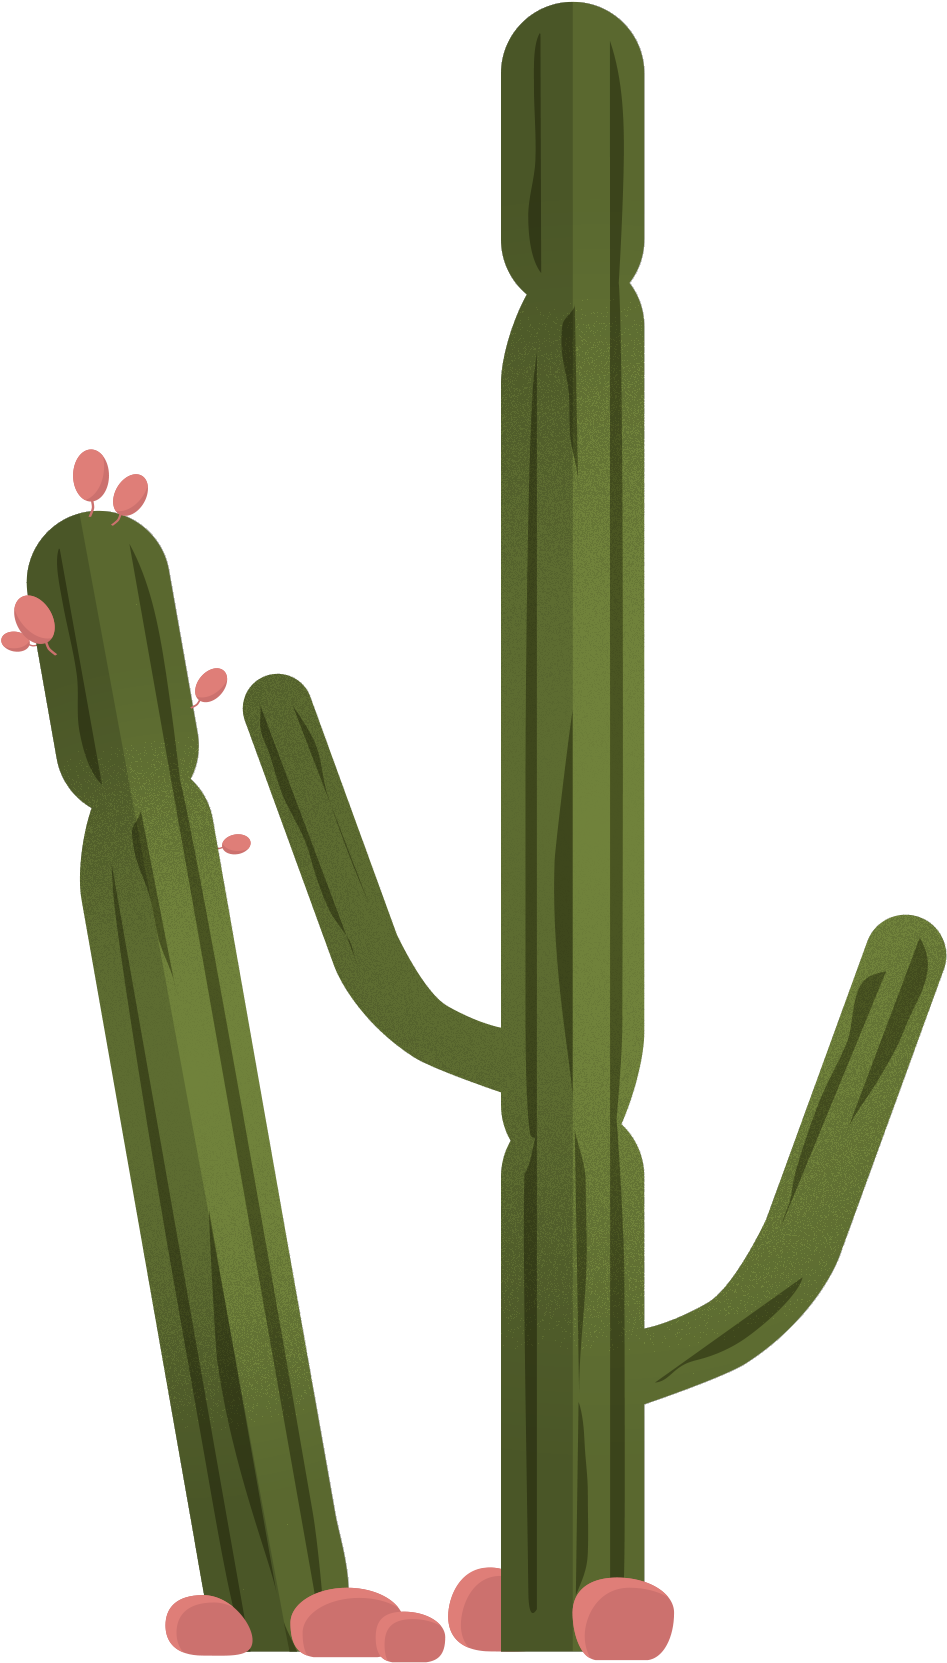 Green cactus plant vector PNG Clipart